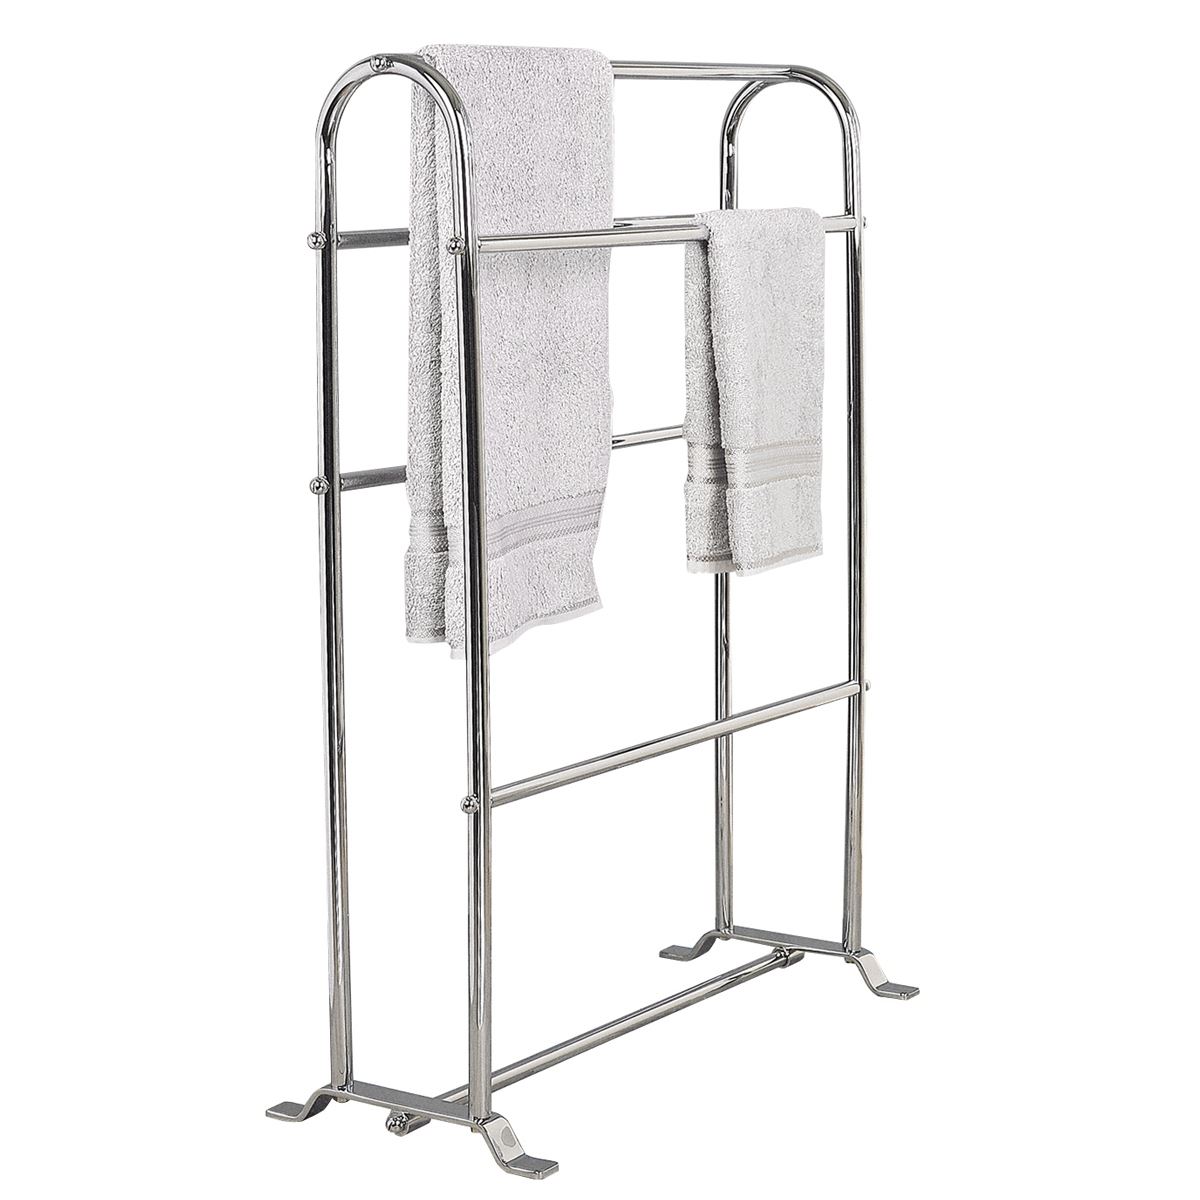 Does this Miller Towel Horse come assembled as one item?